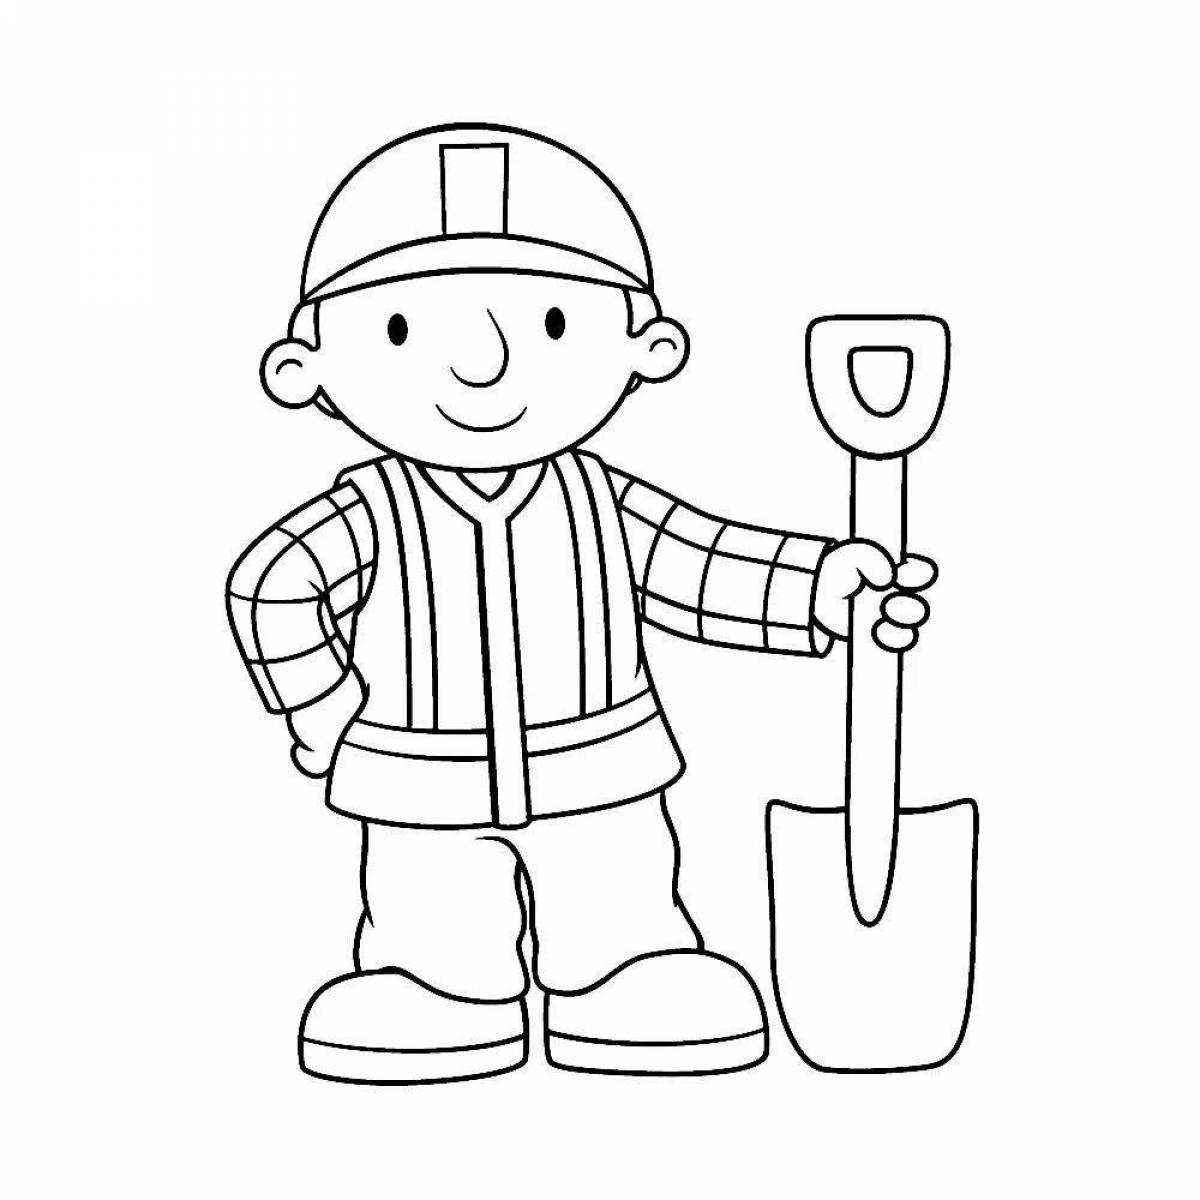 Coloring live construction professions